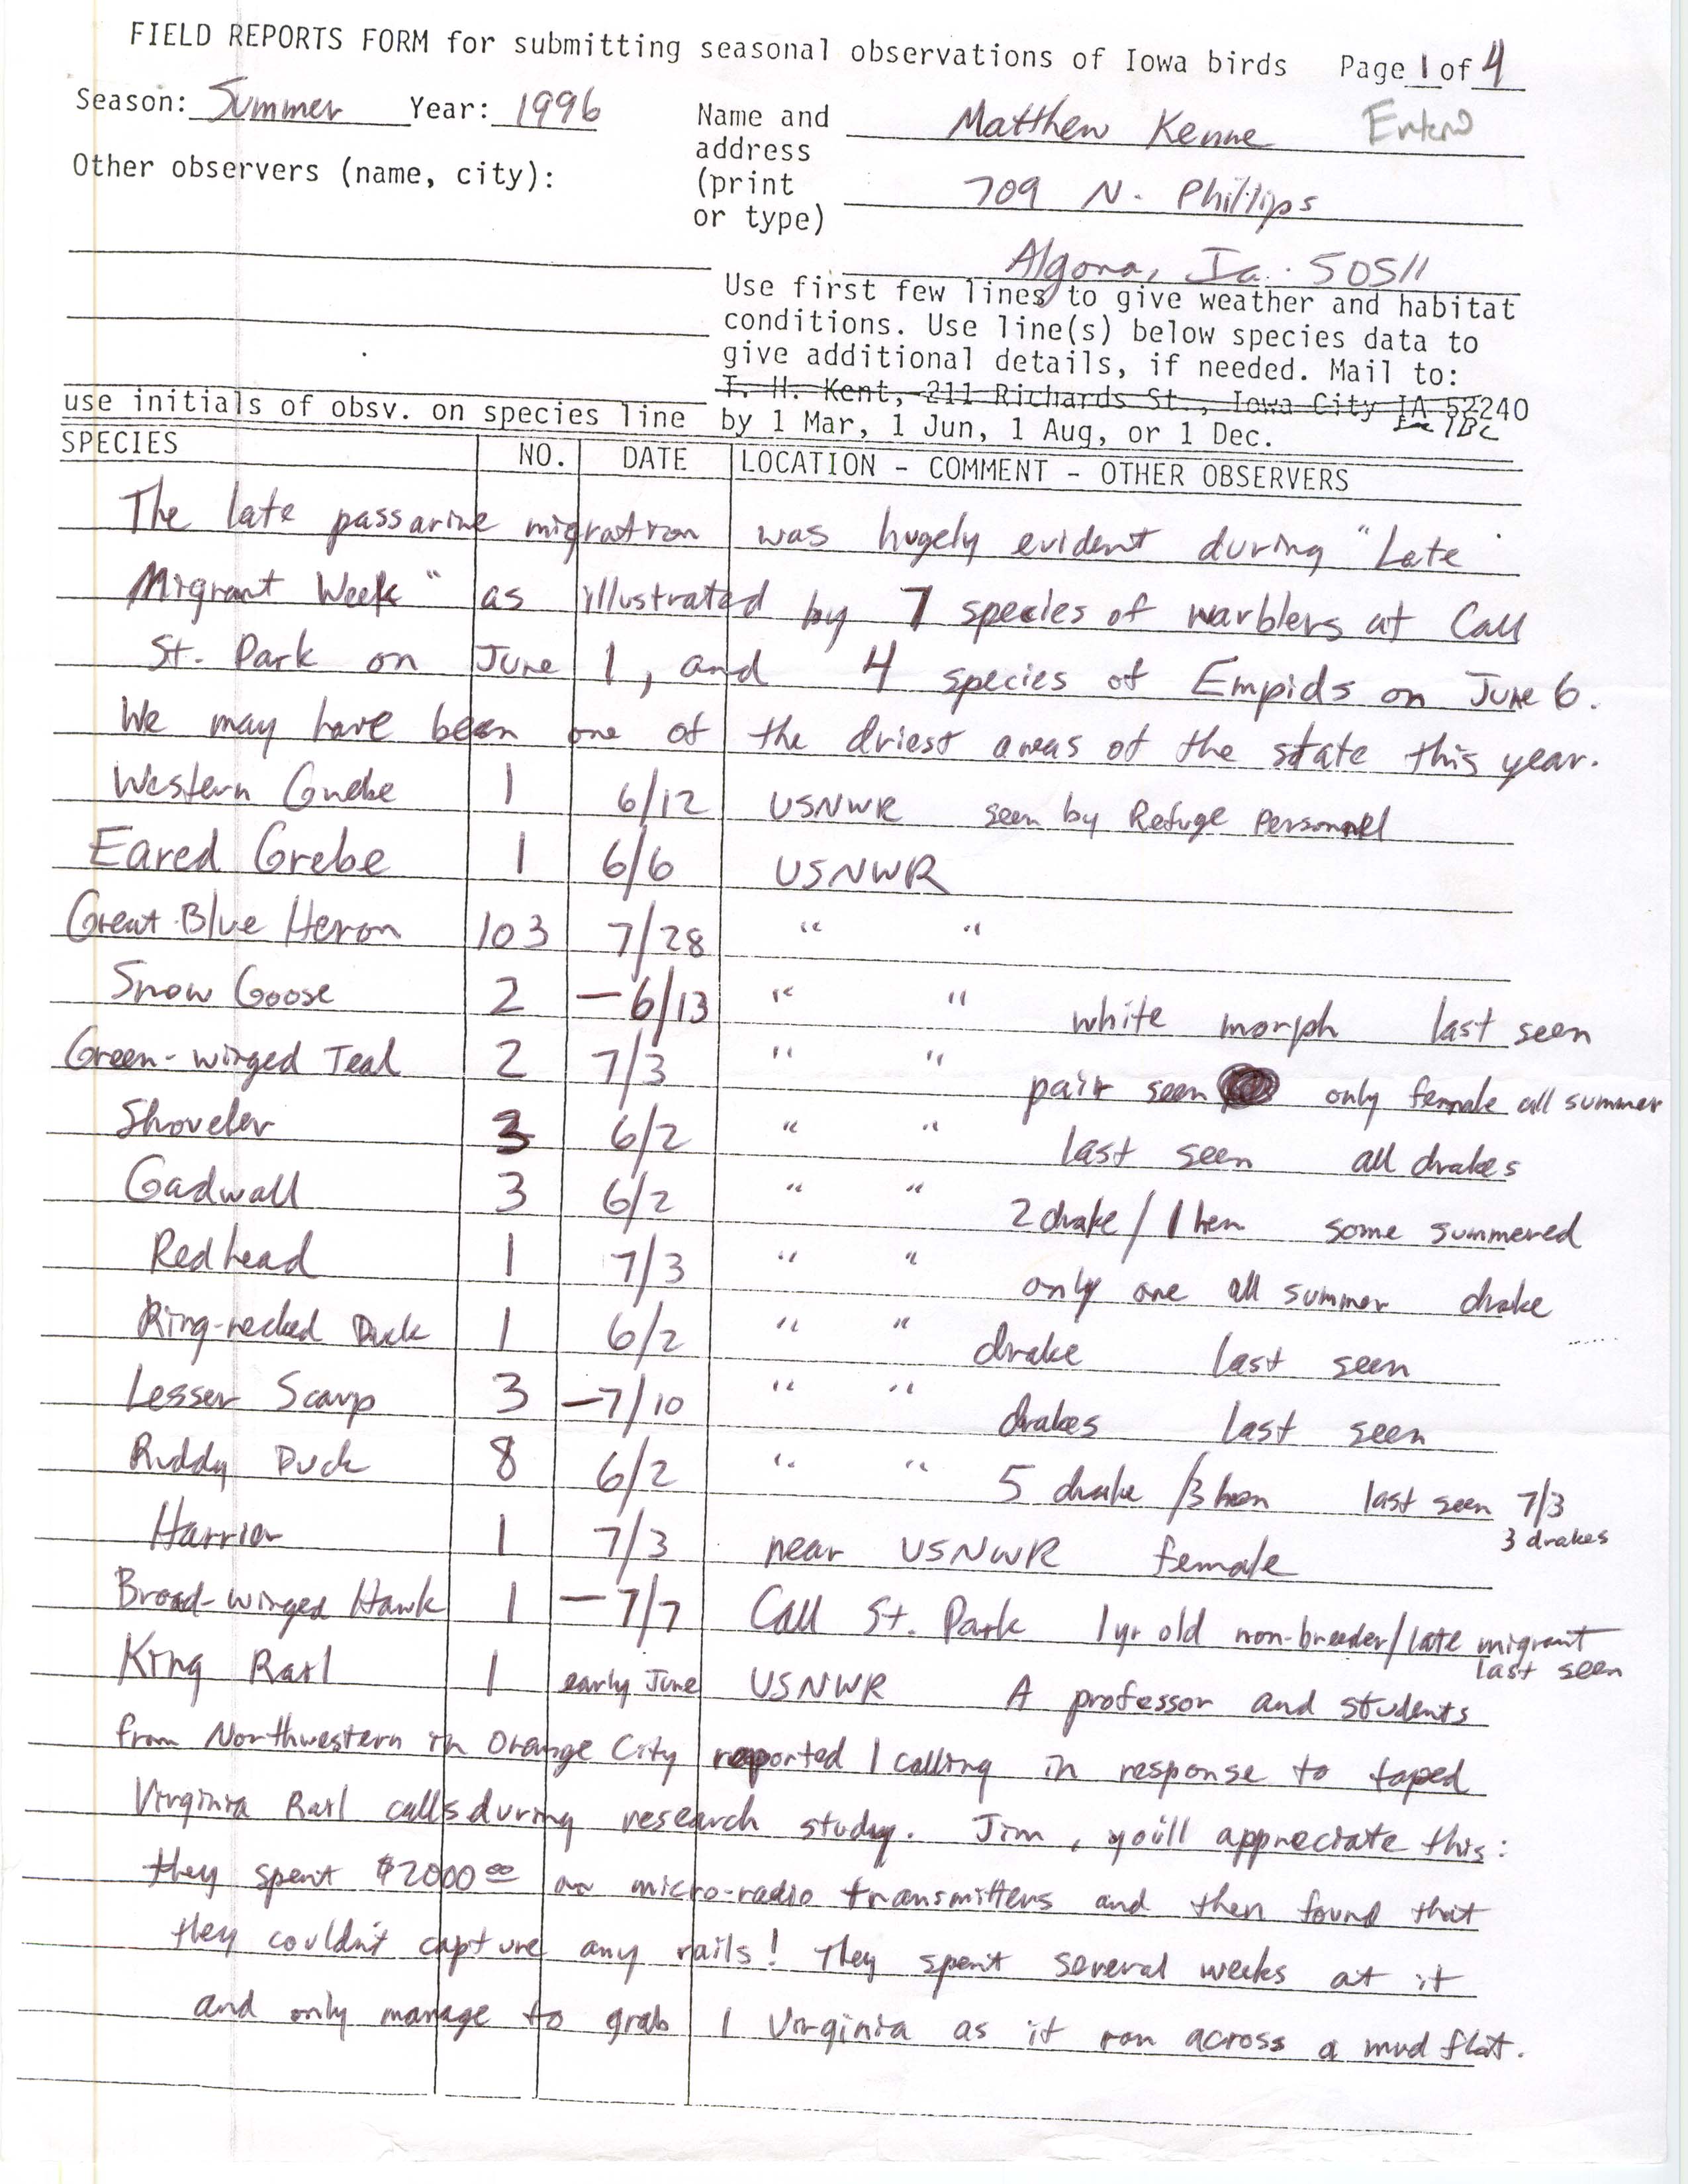 Field reports form for submitting seasonal observations of Iowa birds, Matthew Kenne, summer 1996